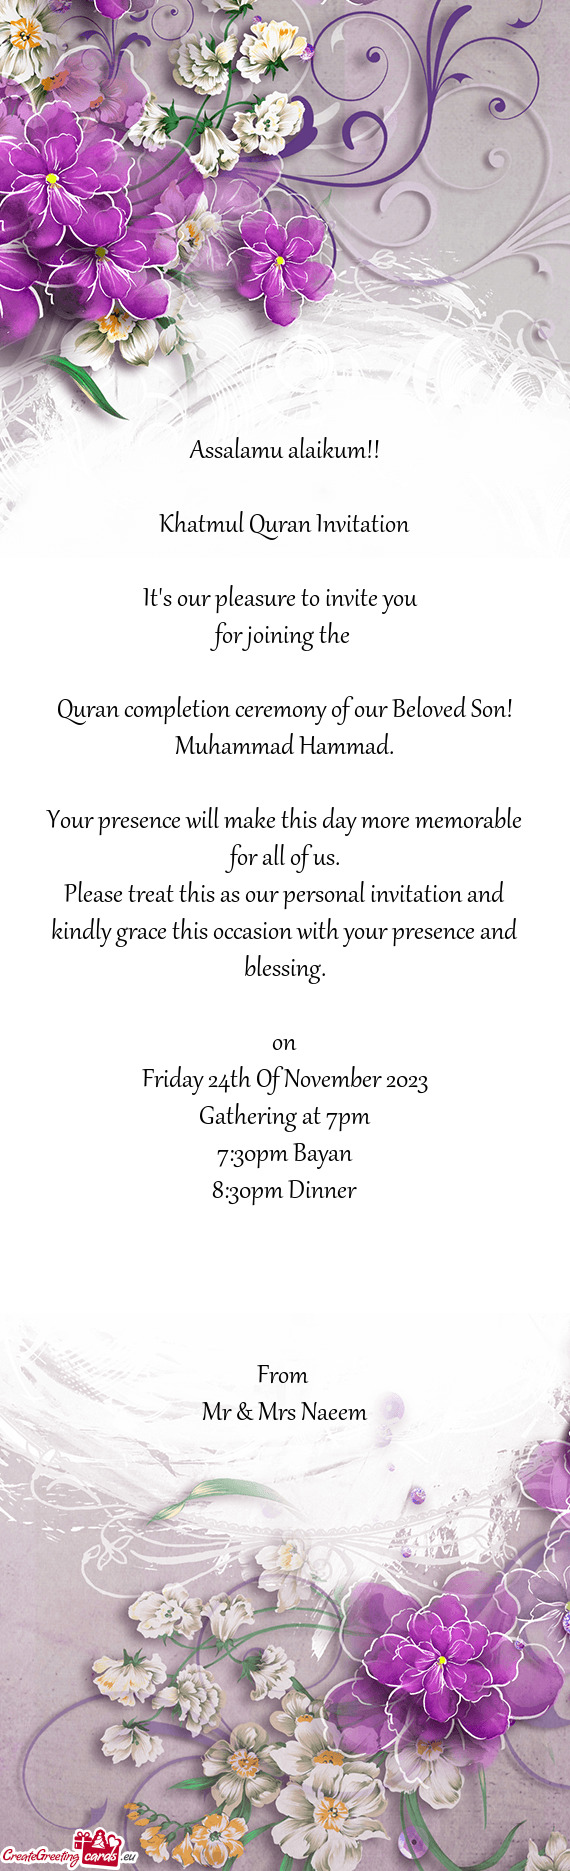 Quran completion ceremony of our Beloved Son! Muhammad Hammad